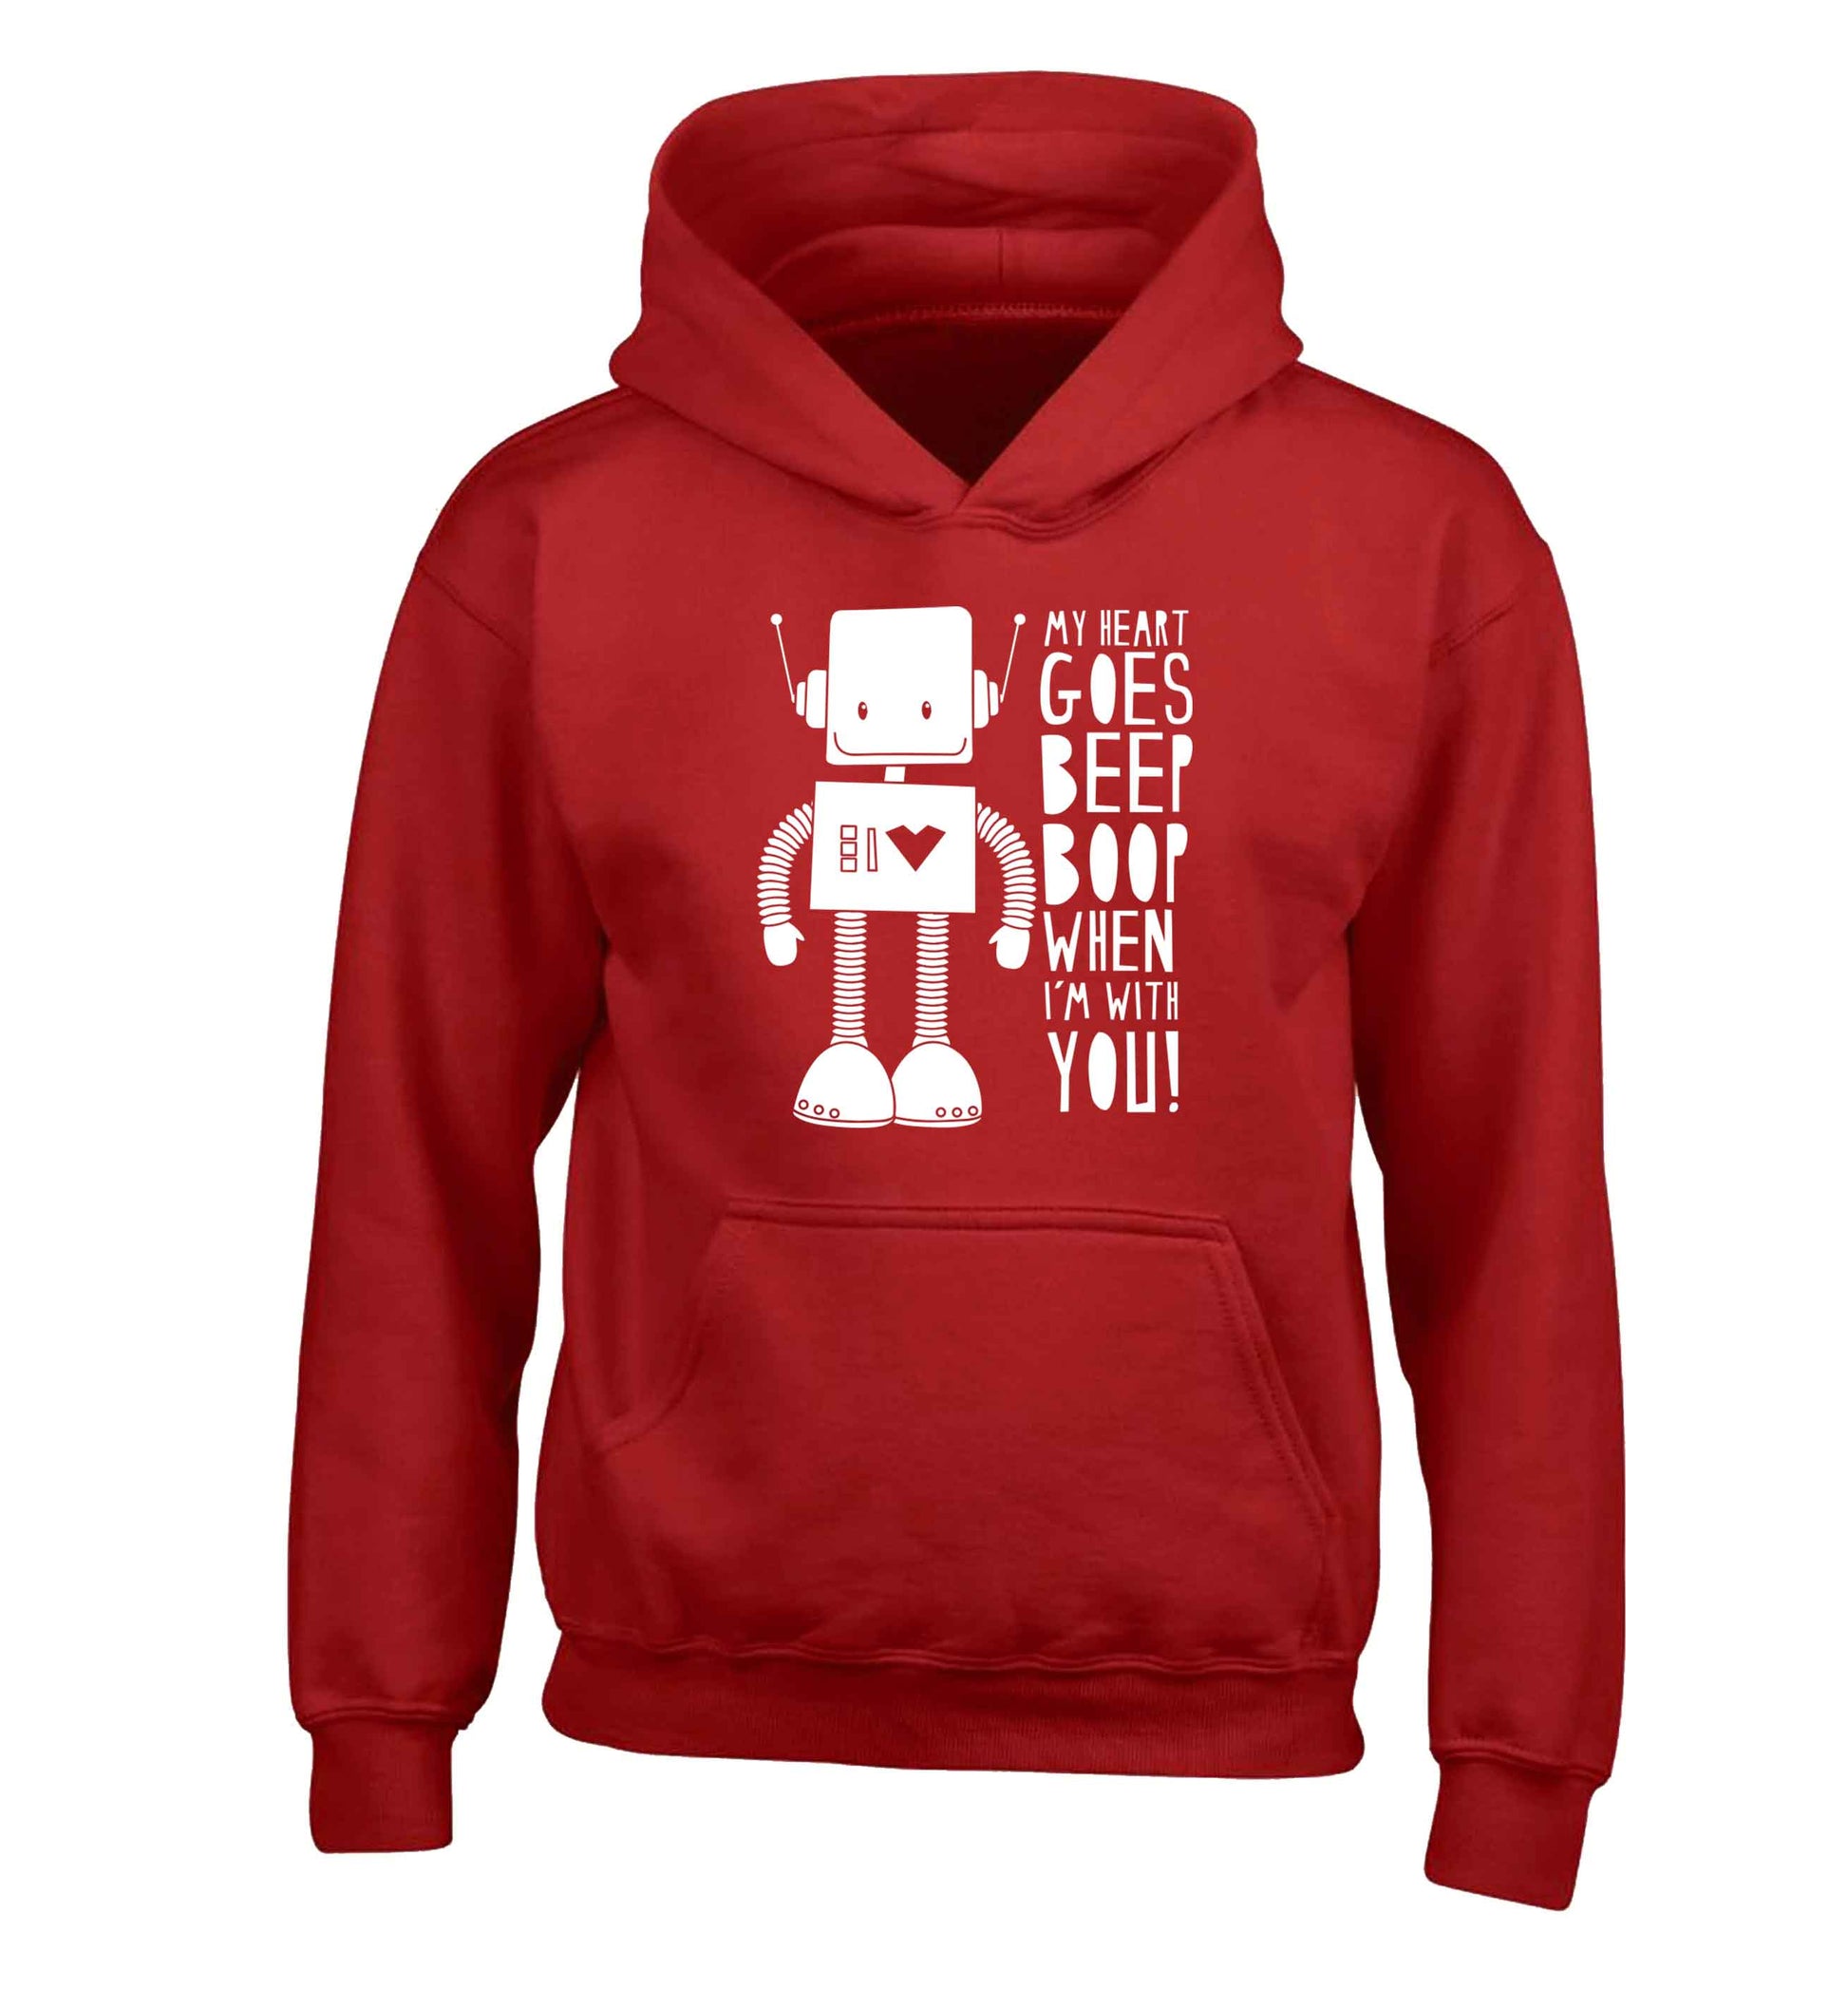 My heart goes beep boop when I'm with you children's red hoodie 12-13 Years